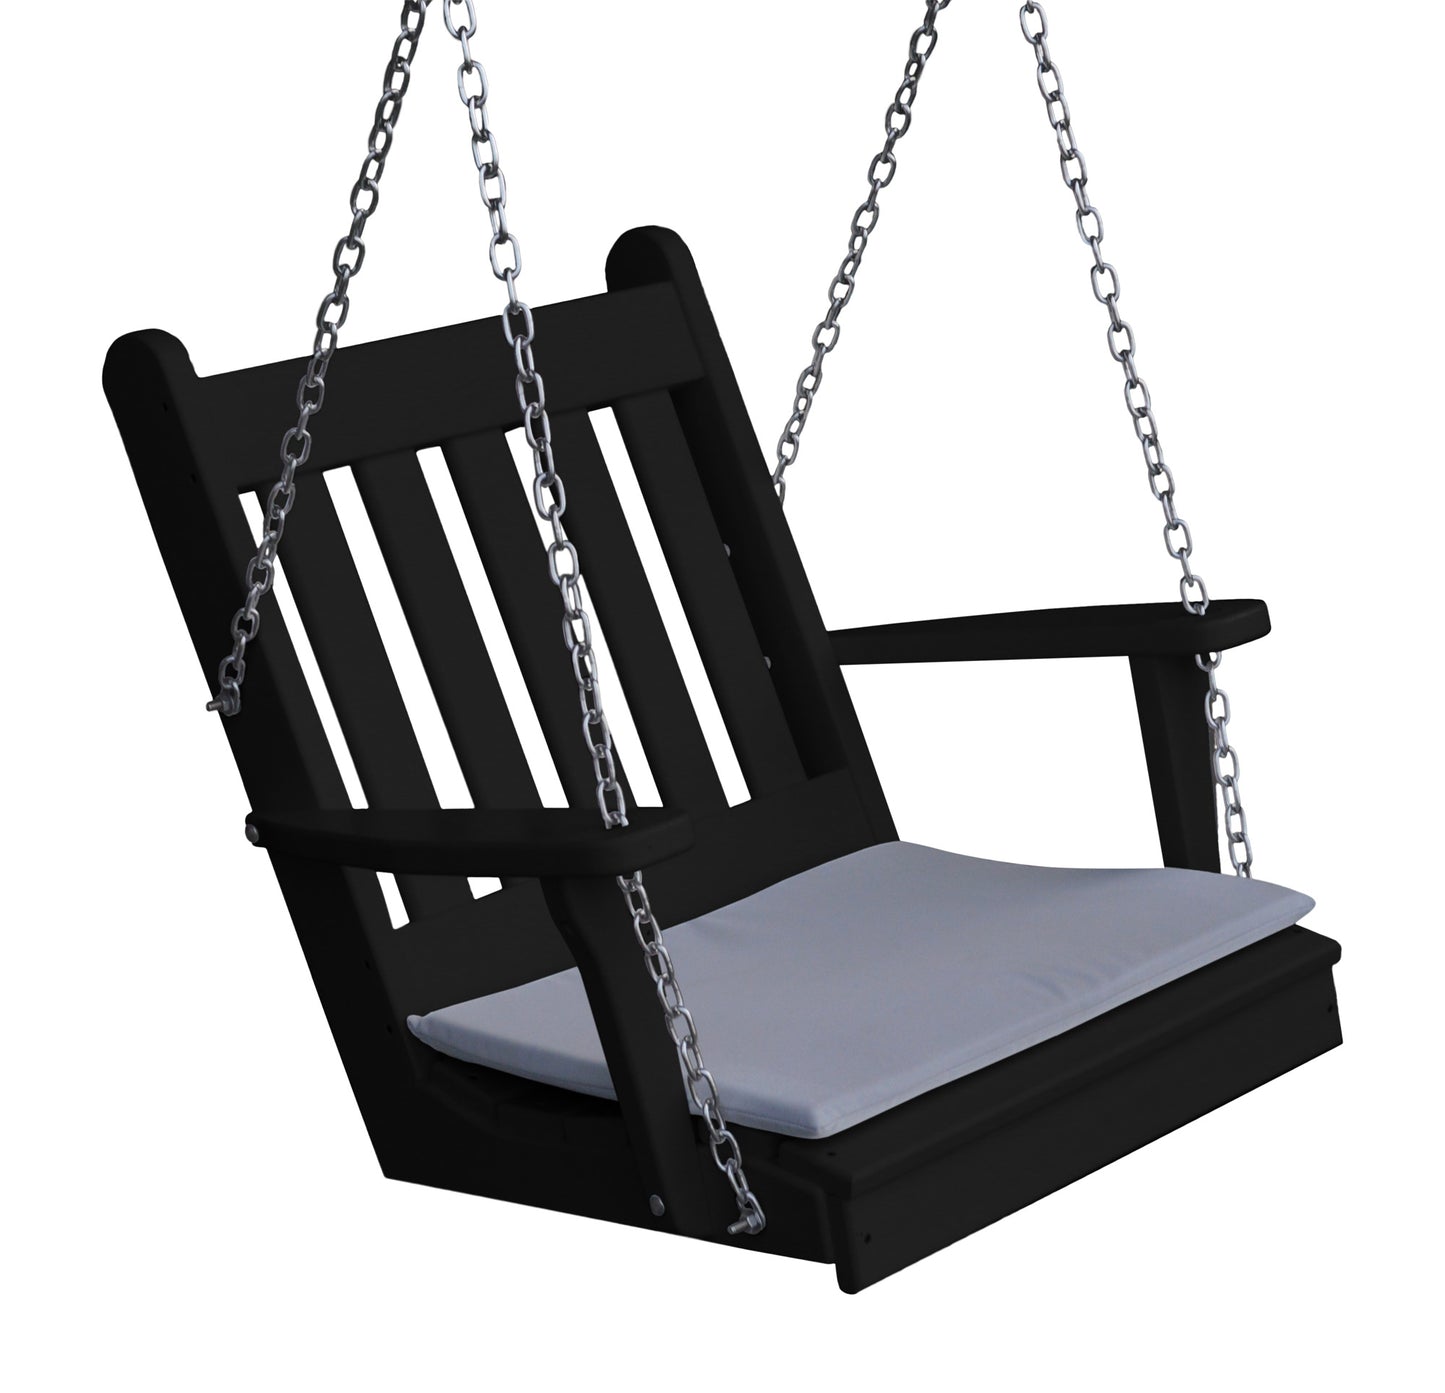 A&L Furniture Co. Traditional English Recycled Plastic Single Porch Swing - LEAD TIME TO SHIP 10 BUSINESS DAYS